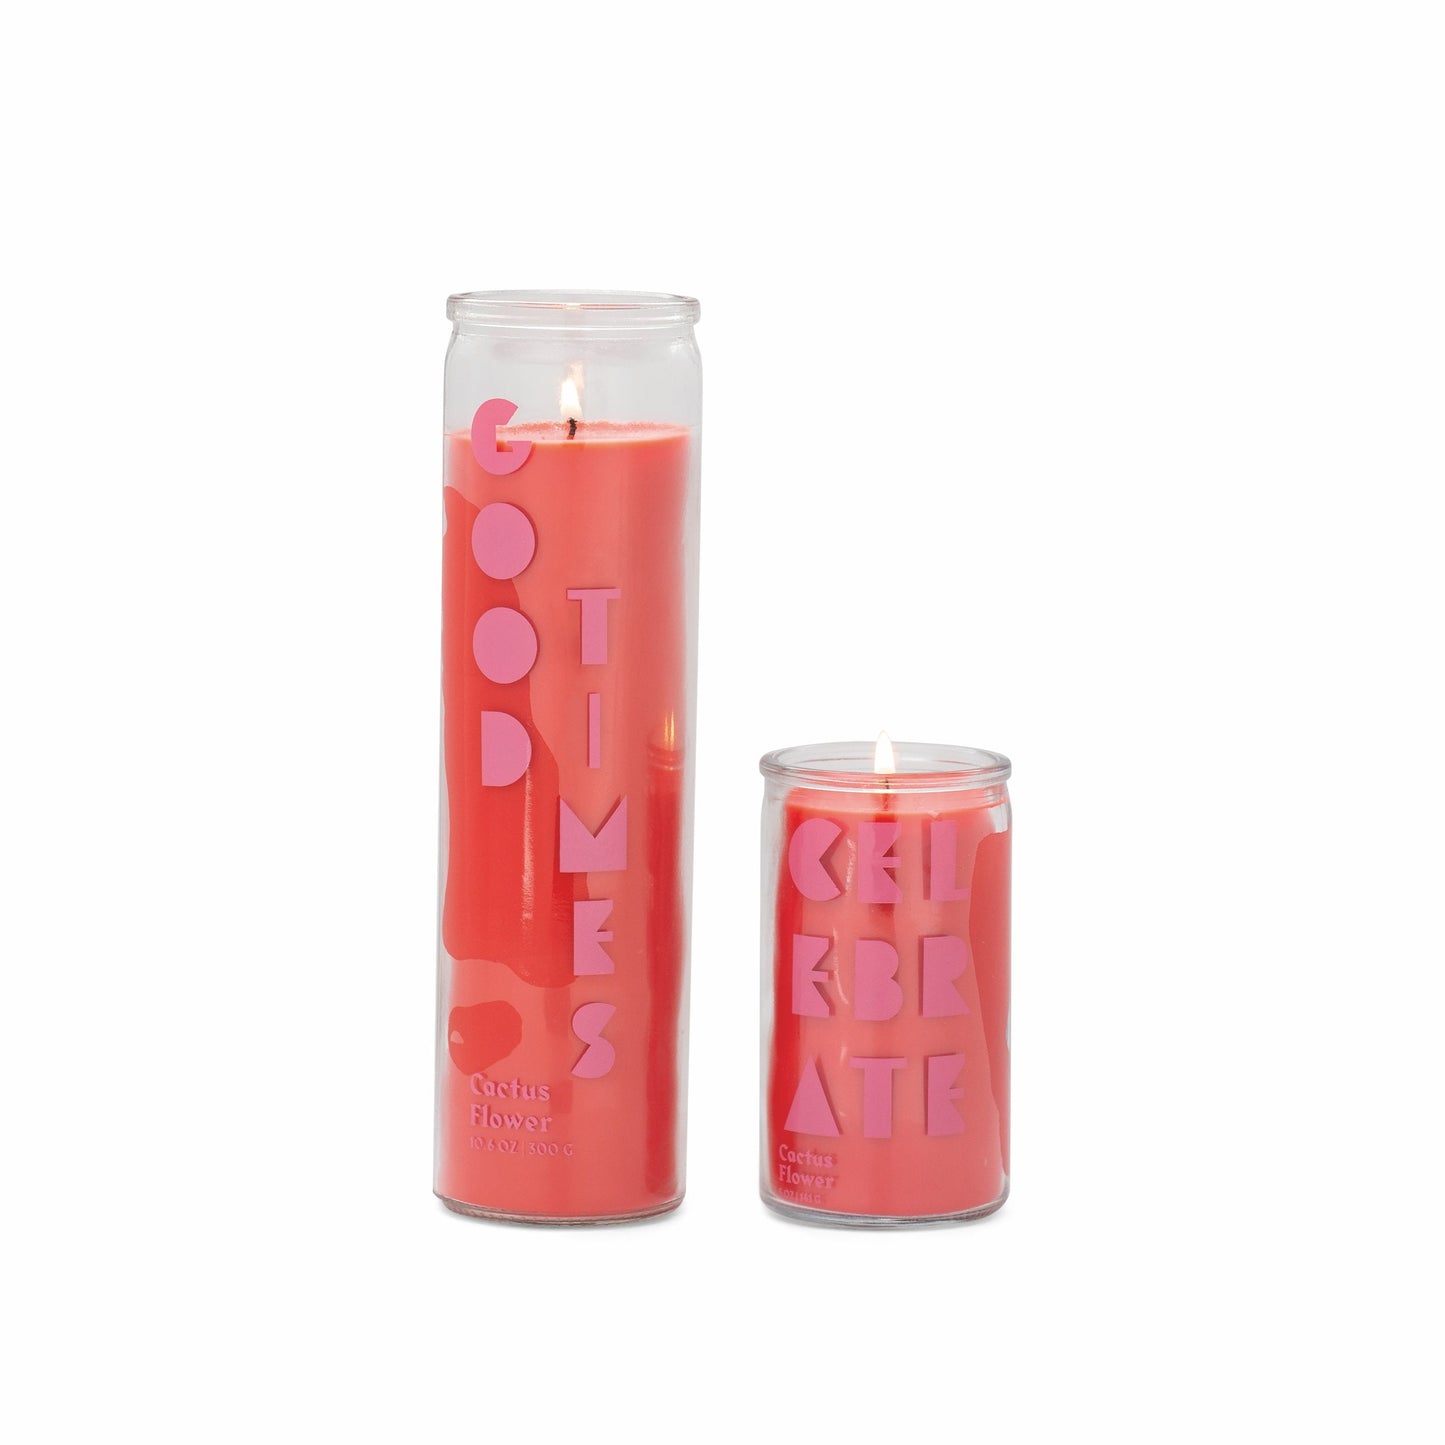 Spark Candle - Good Times - Cactus Flower (300g)